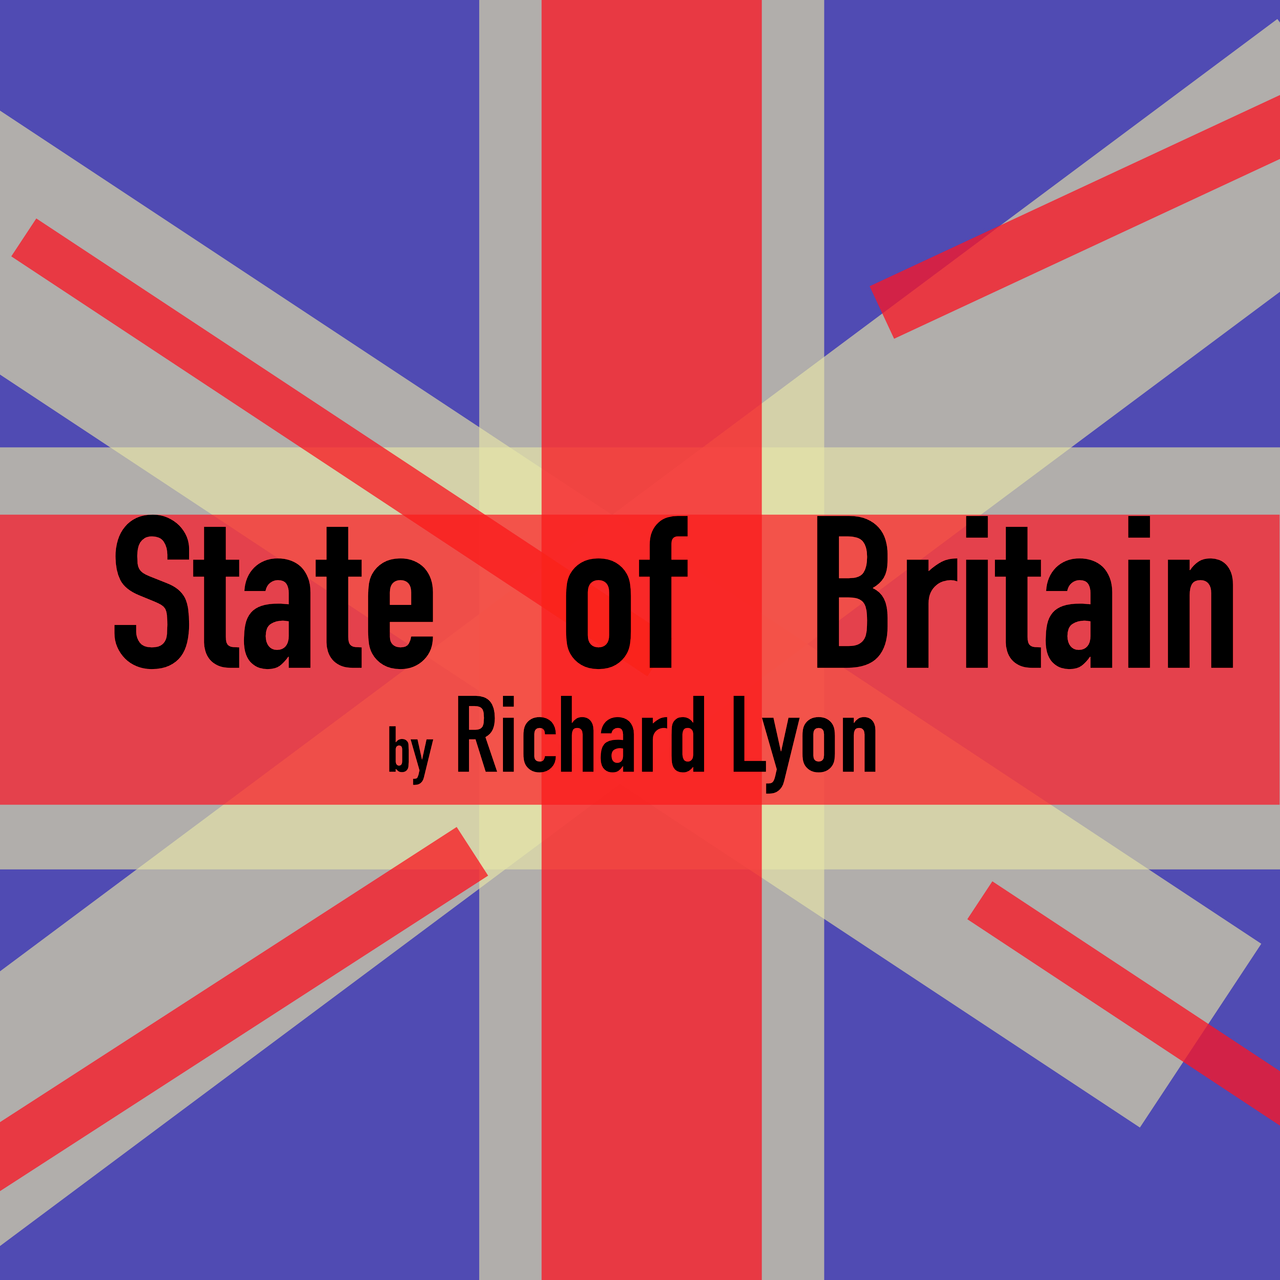 The State of Britain by Richard Lyon